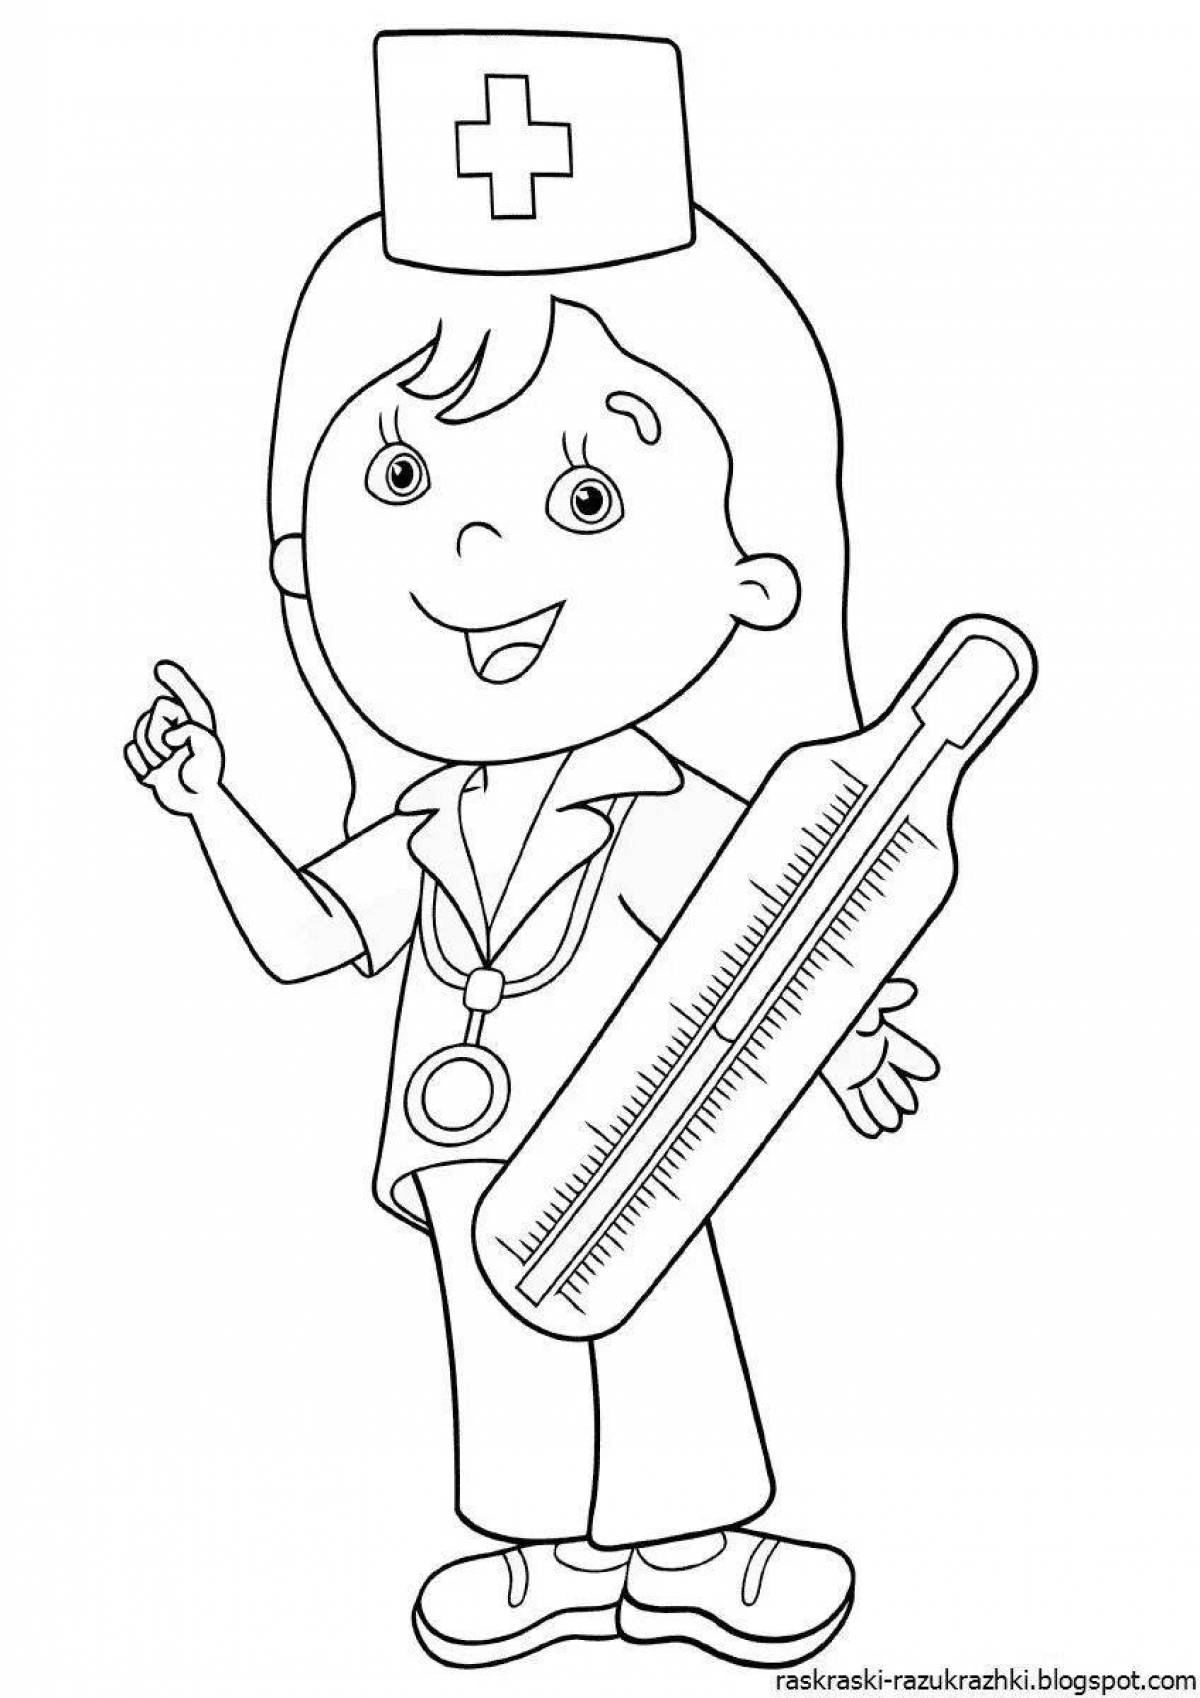 Coloring book fabulous profession of a doctor